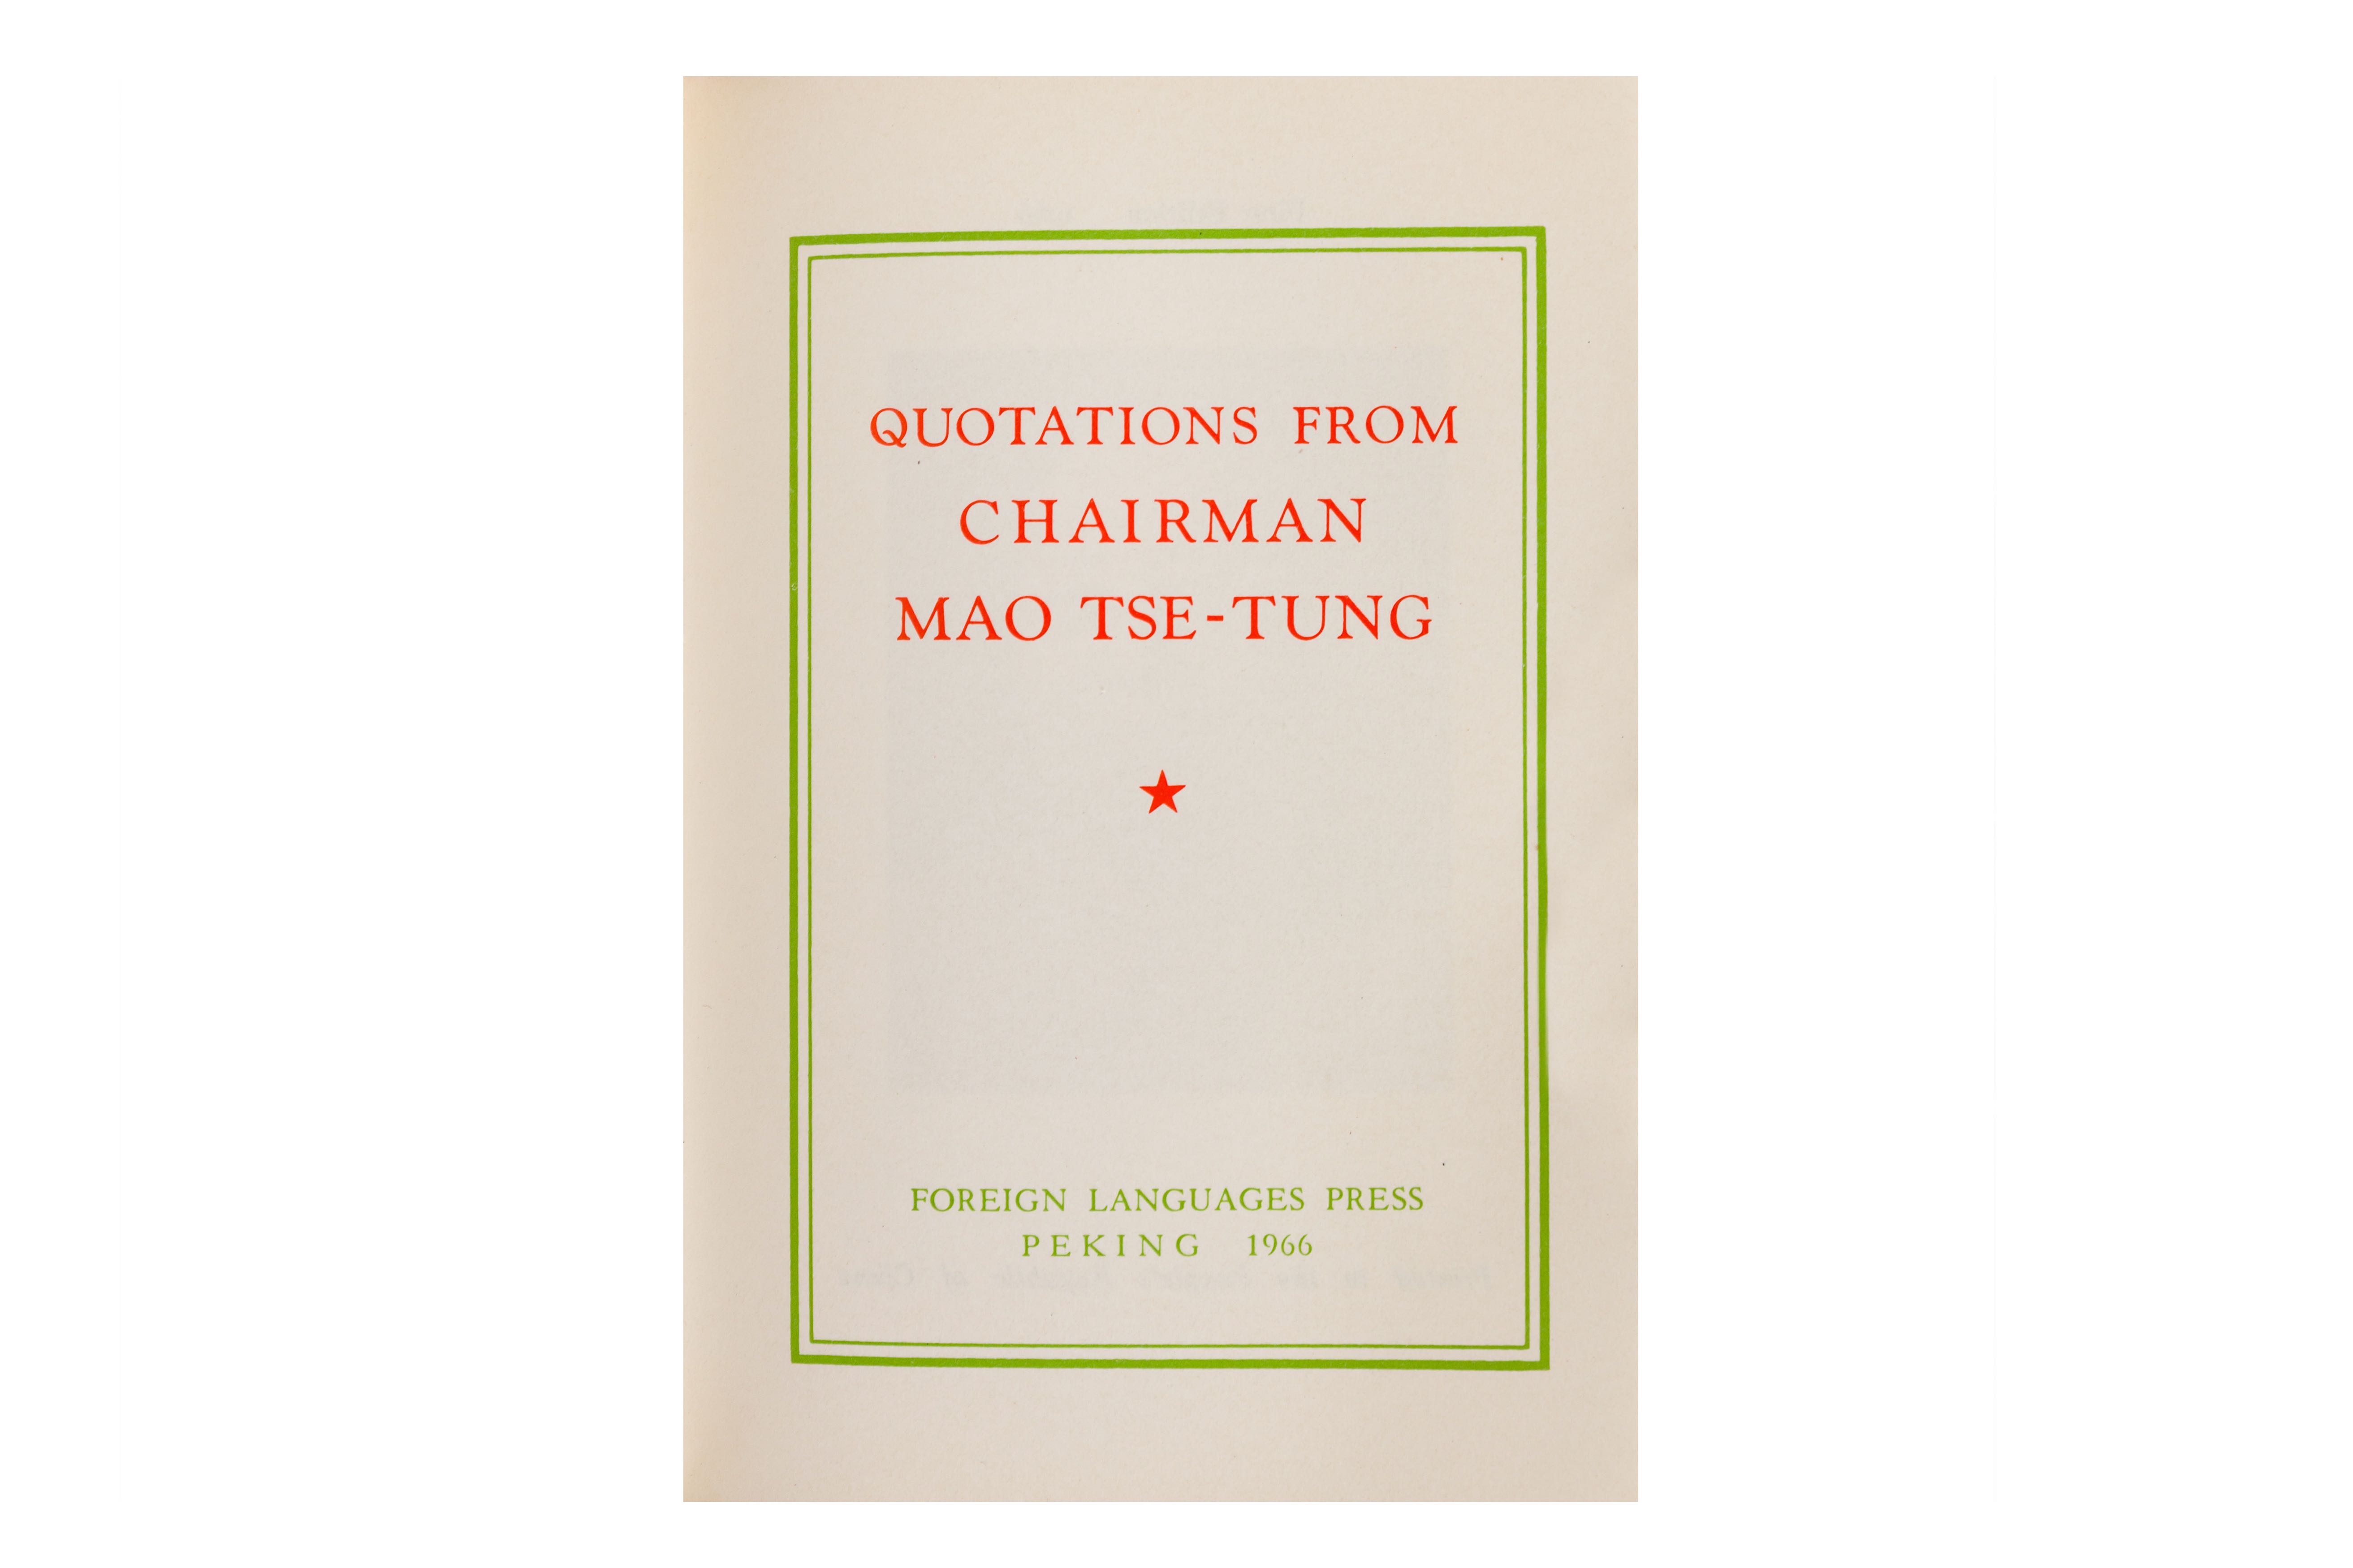 Mao Tse-Tung: Quotations From Chairman Mao Tse-Tung [Little Red Book] - Image 12 of 13